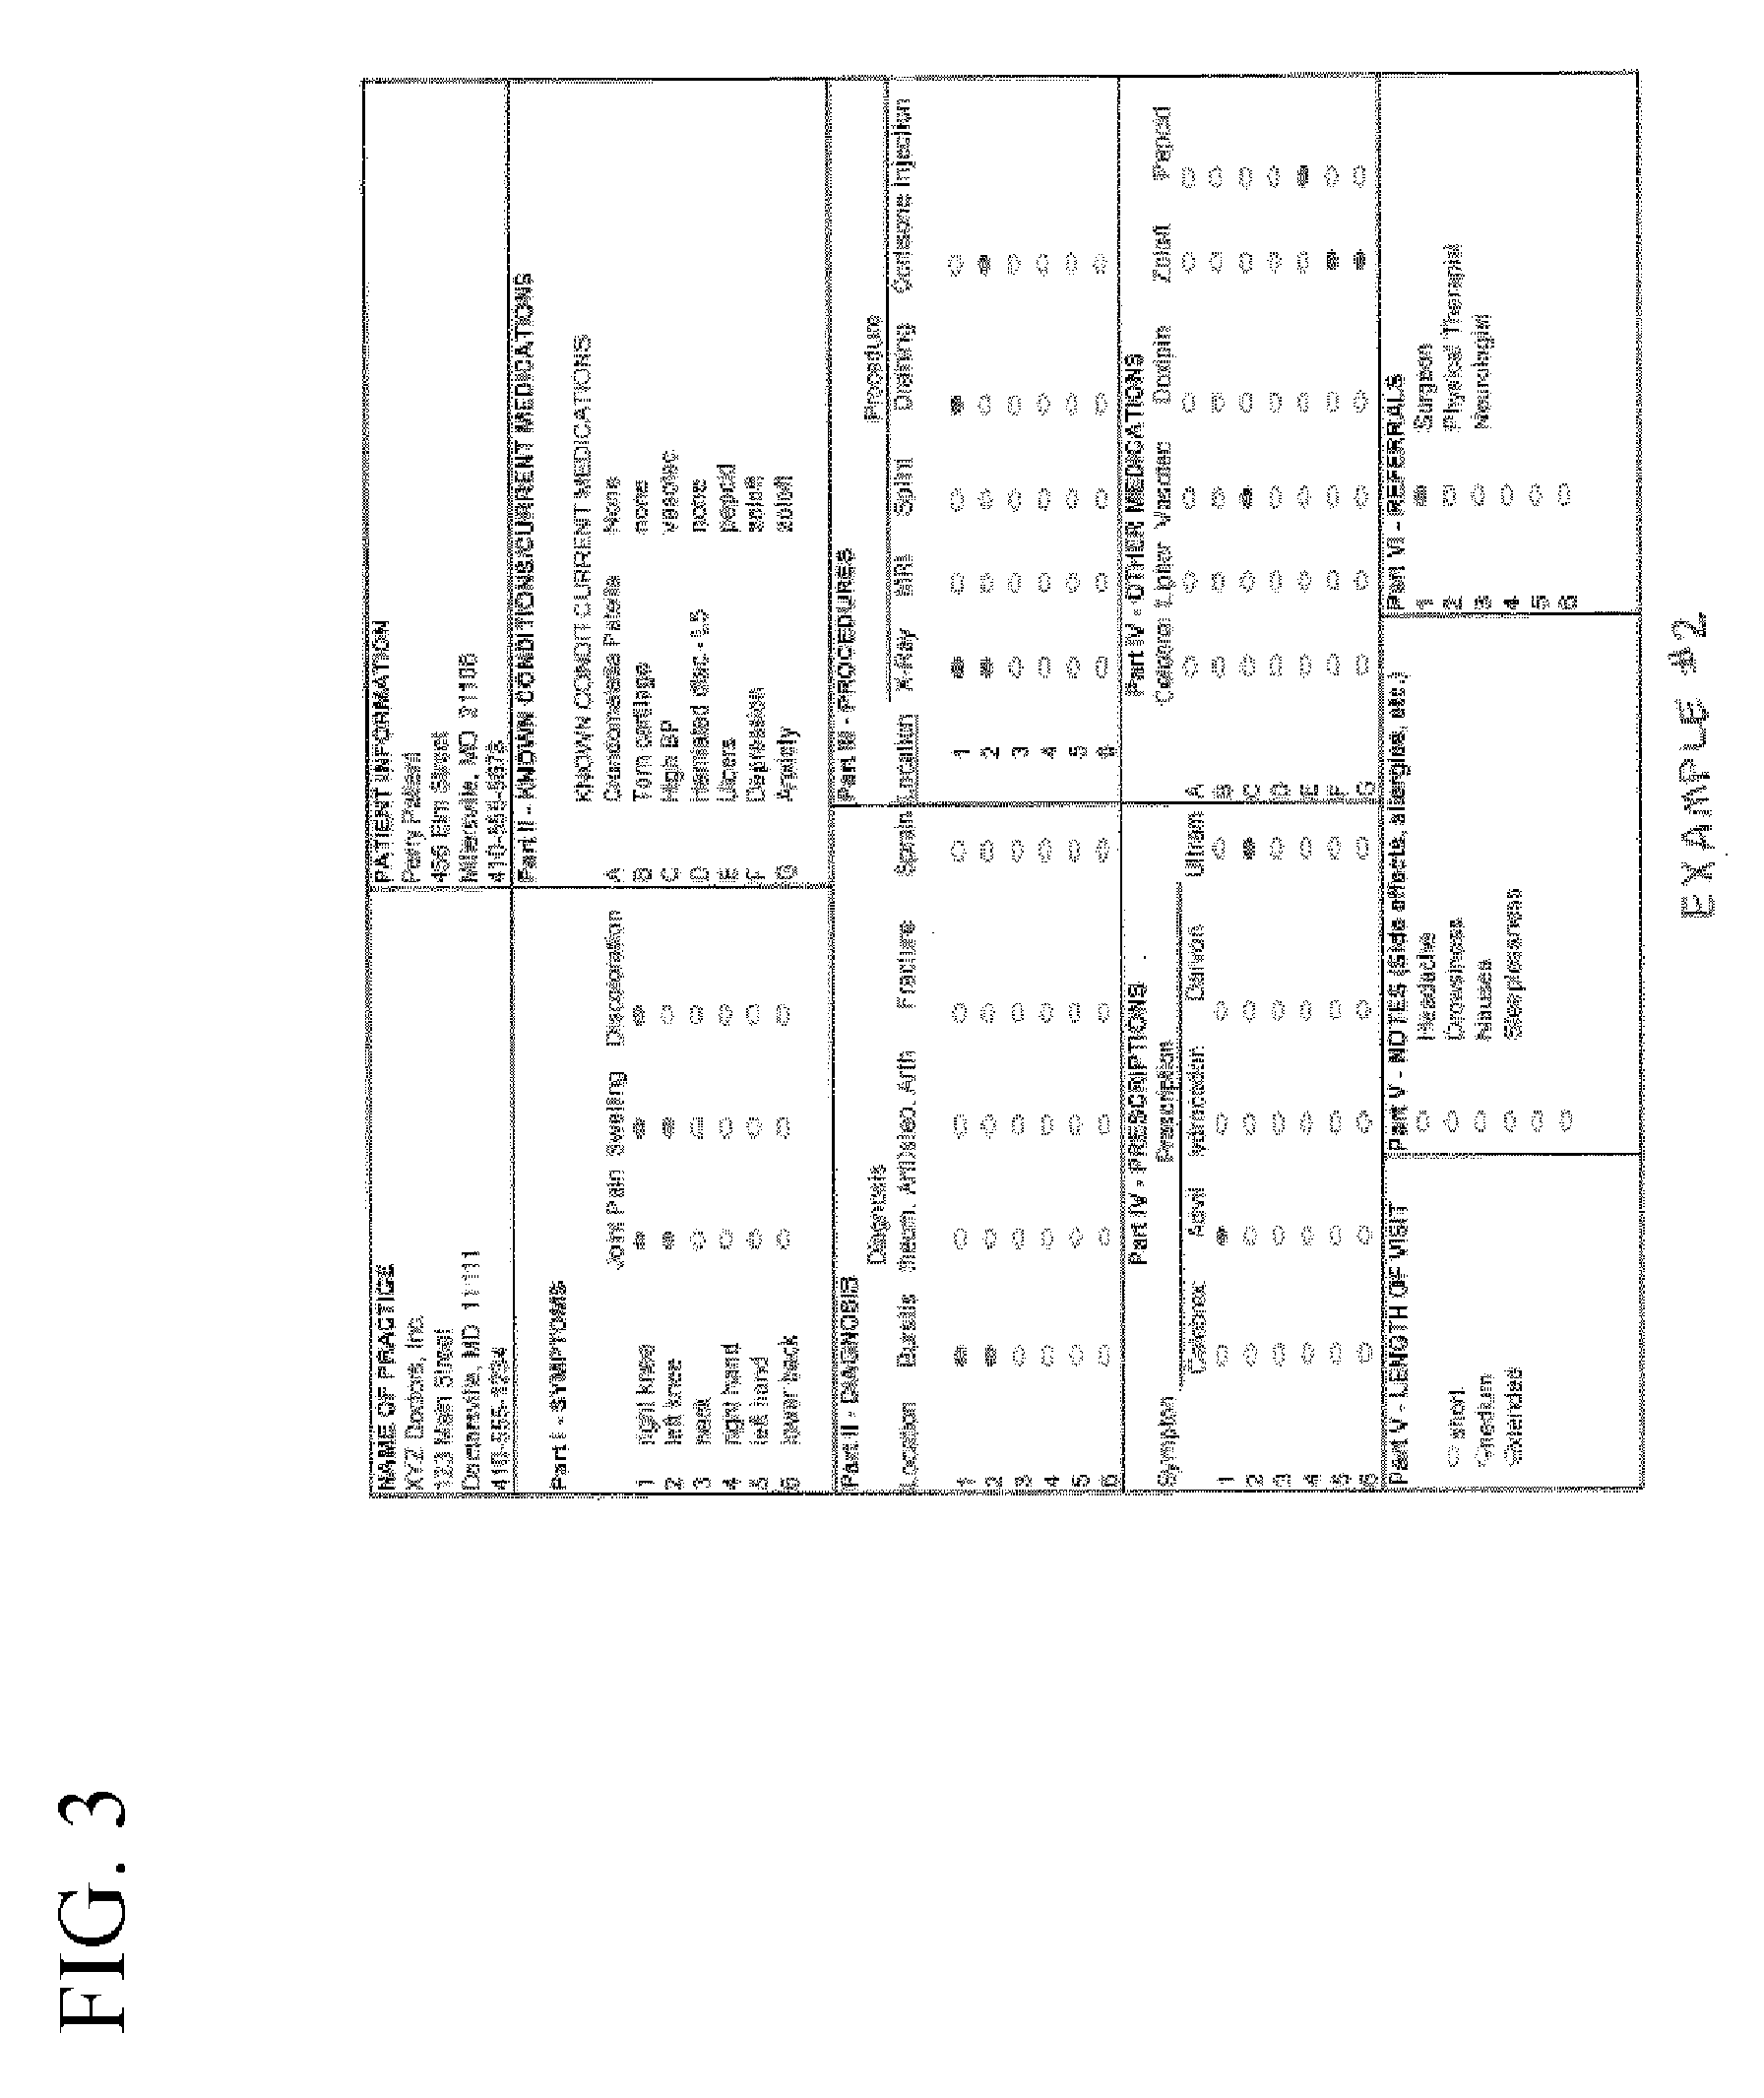 System and method for collecting diagnosis and prescription drug information